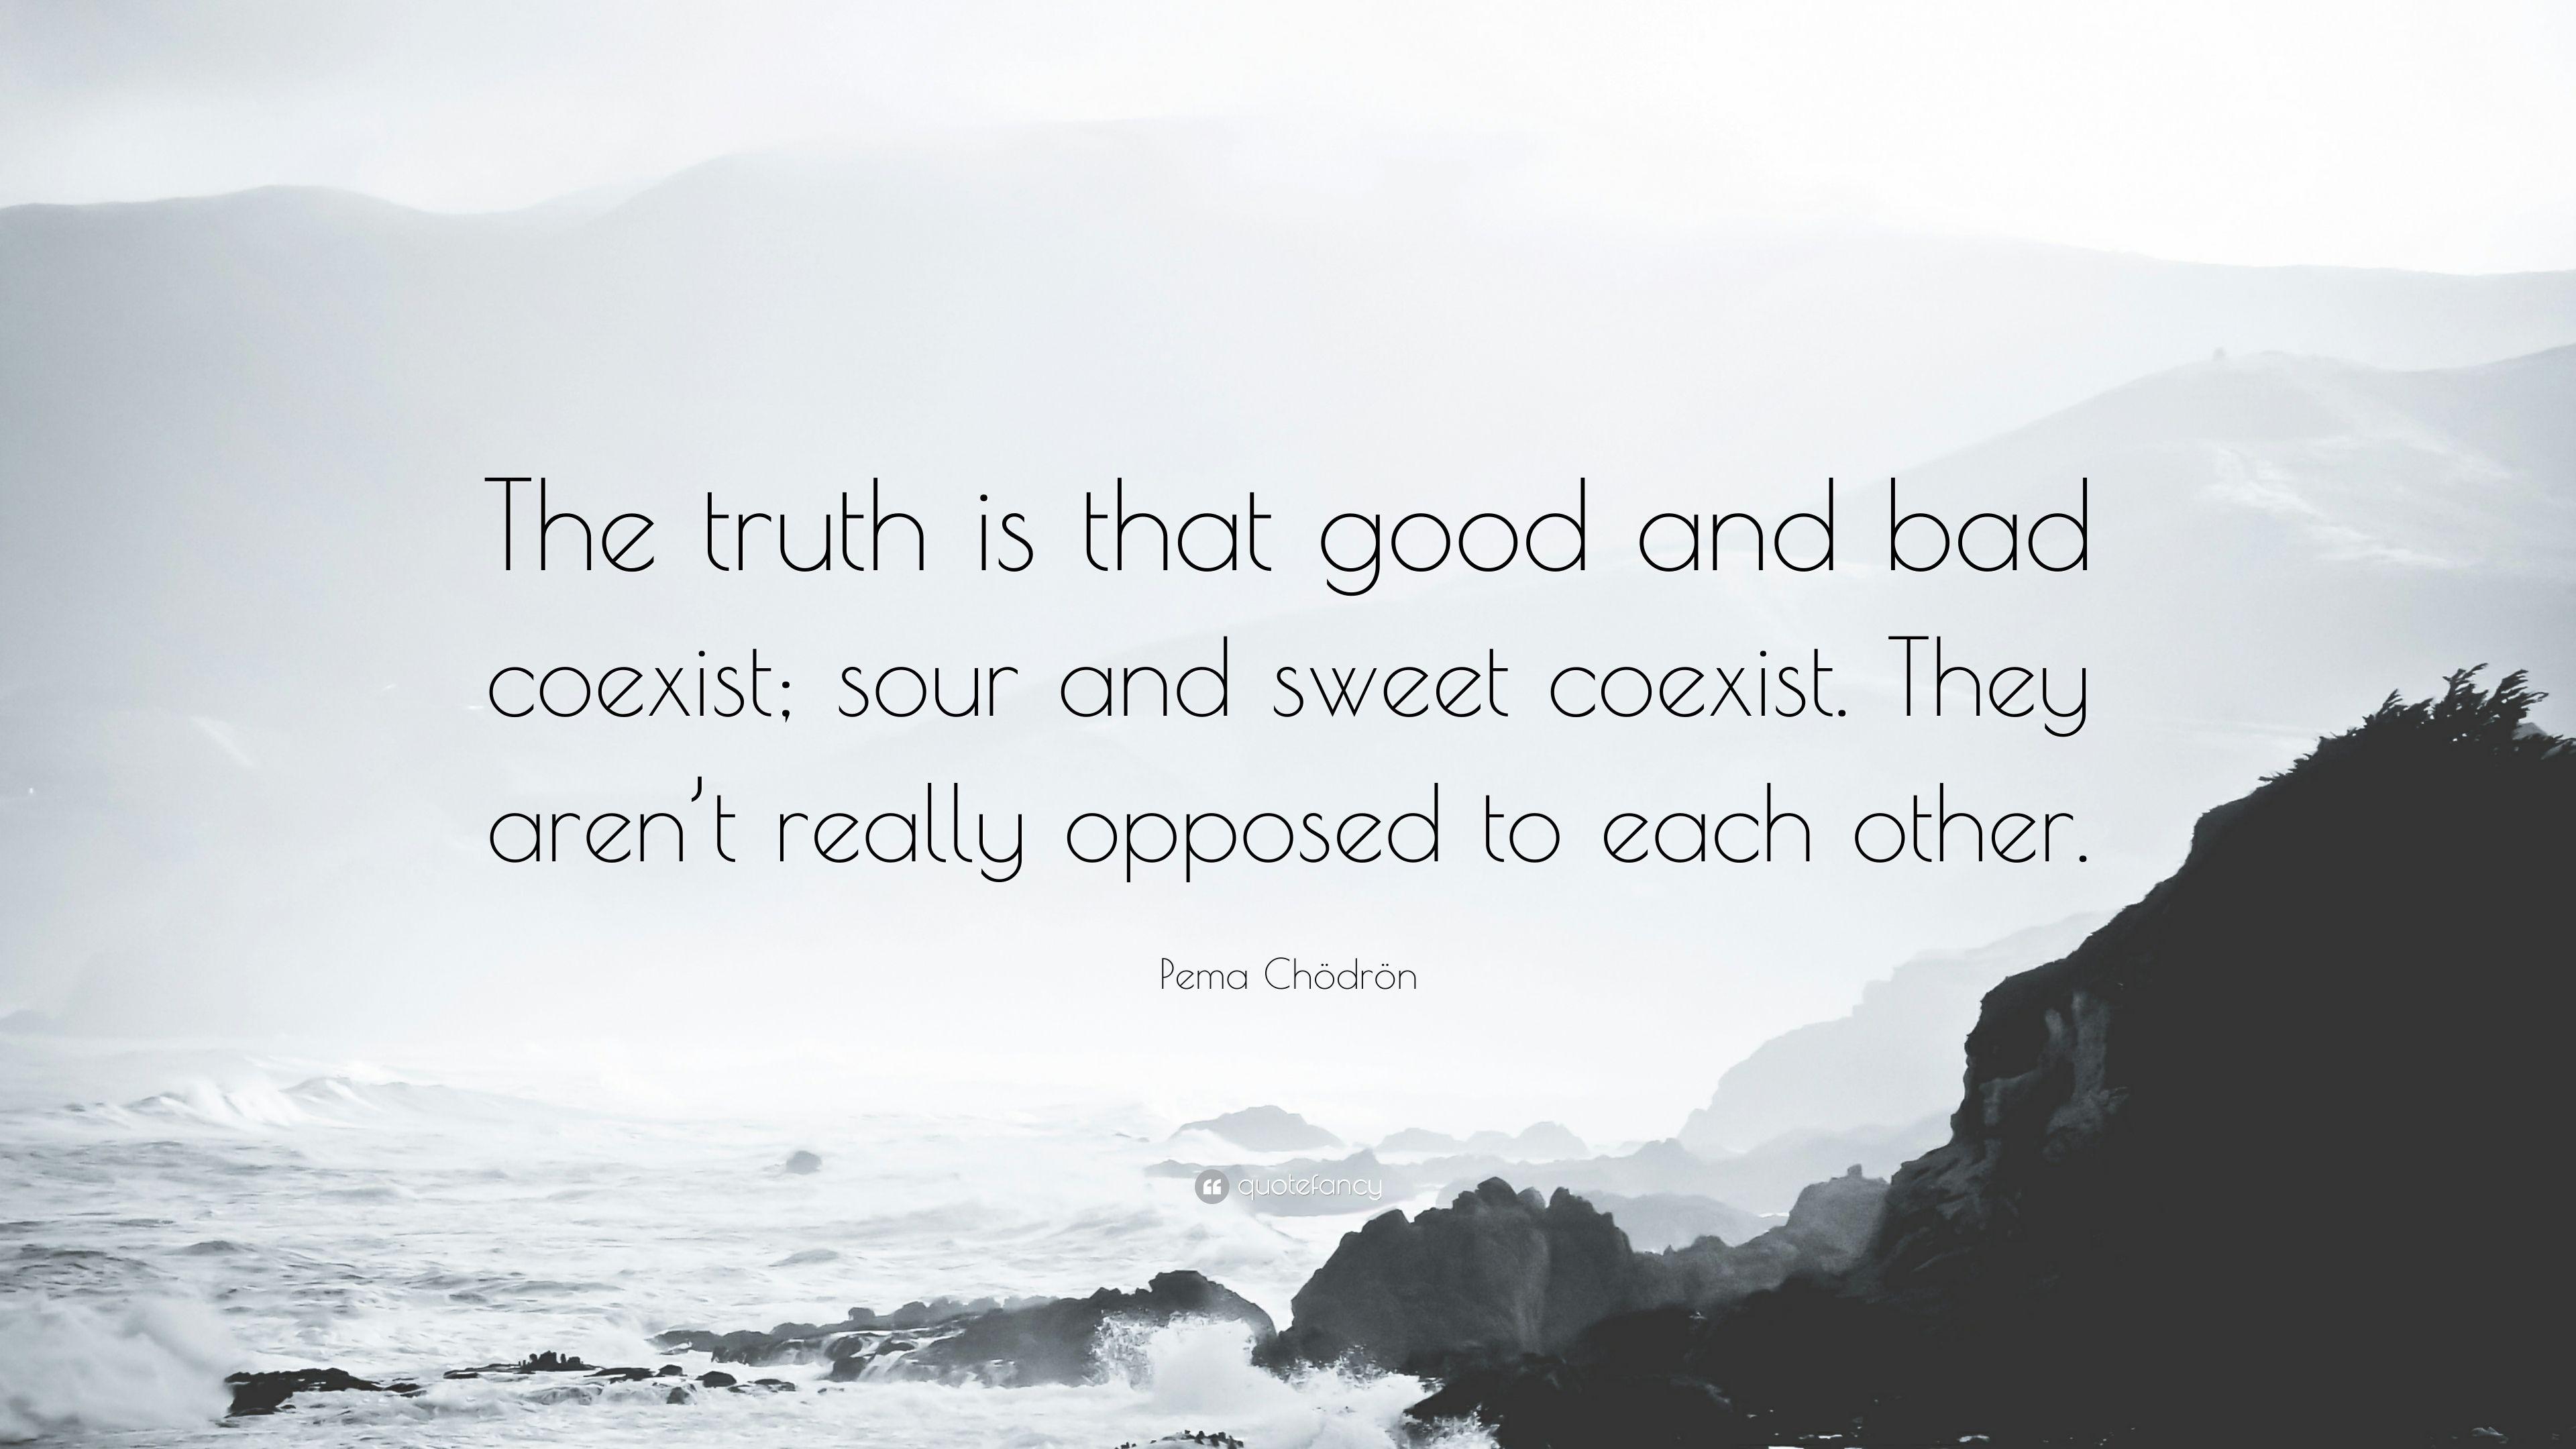 Pema Chödrön Quote: “The truth is that good and bad coexist; sour